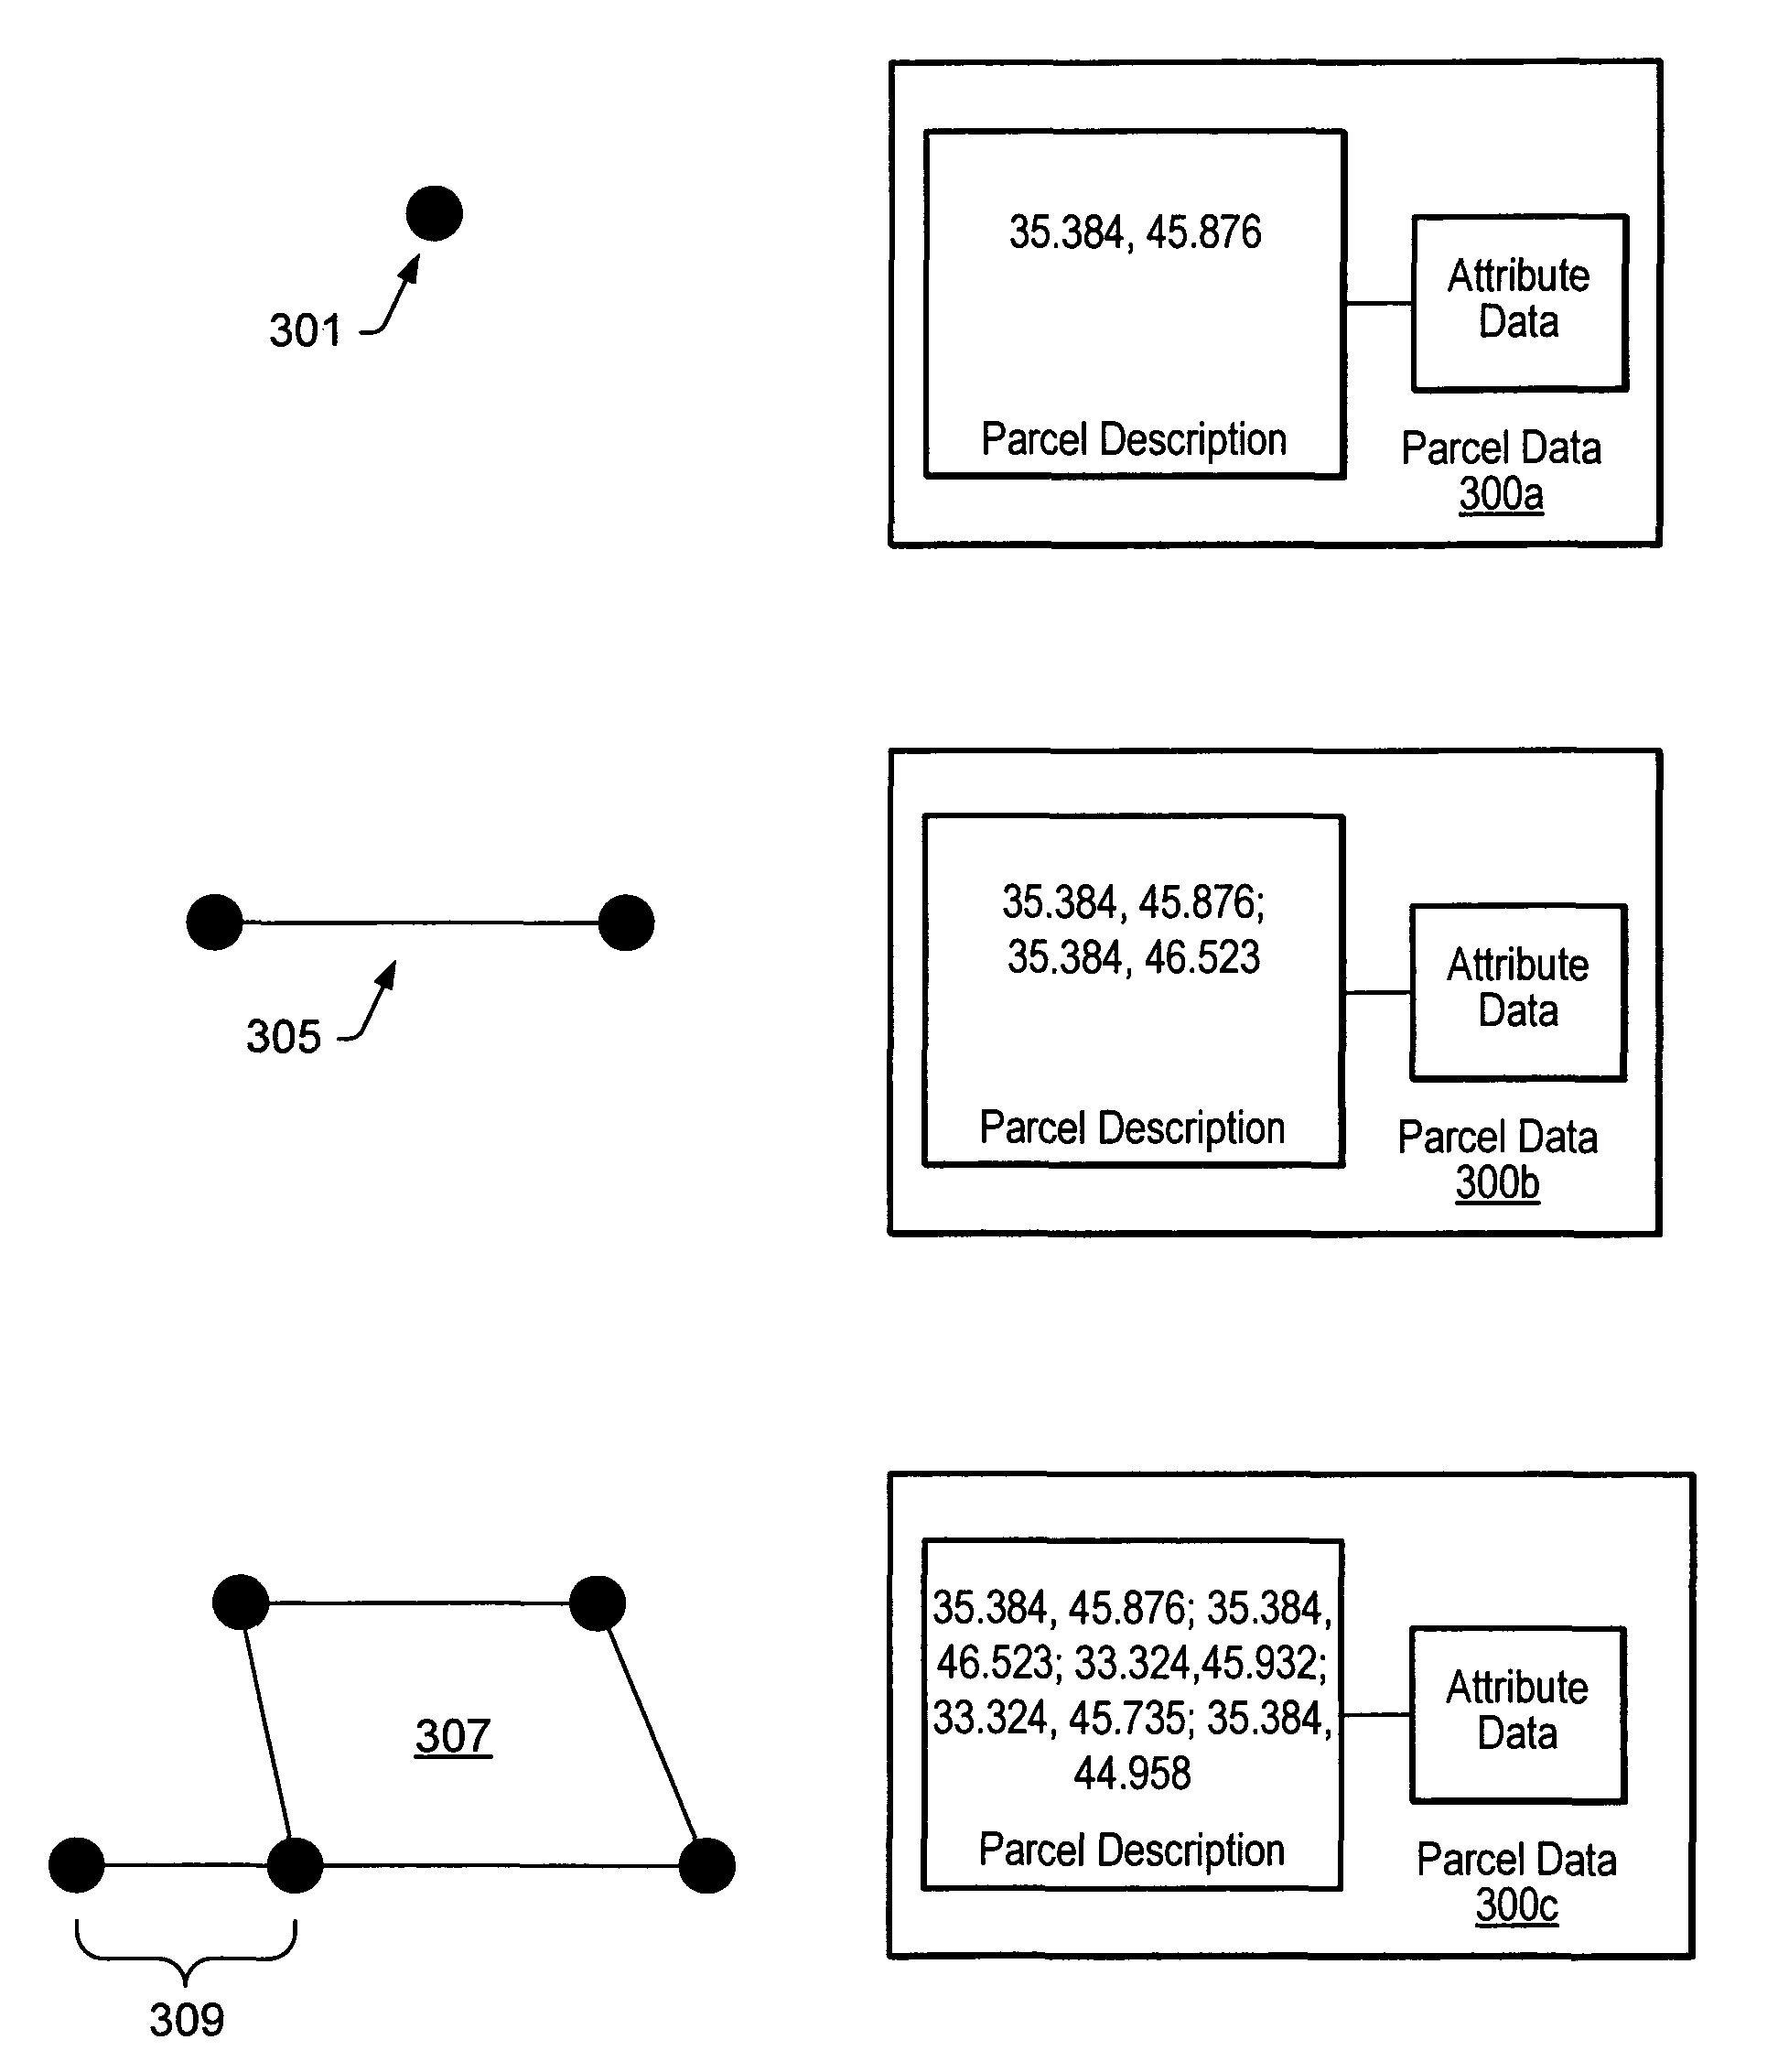 Parcel data acquisition and processing